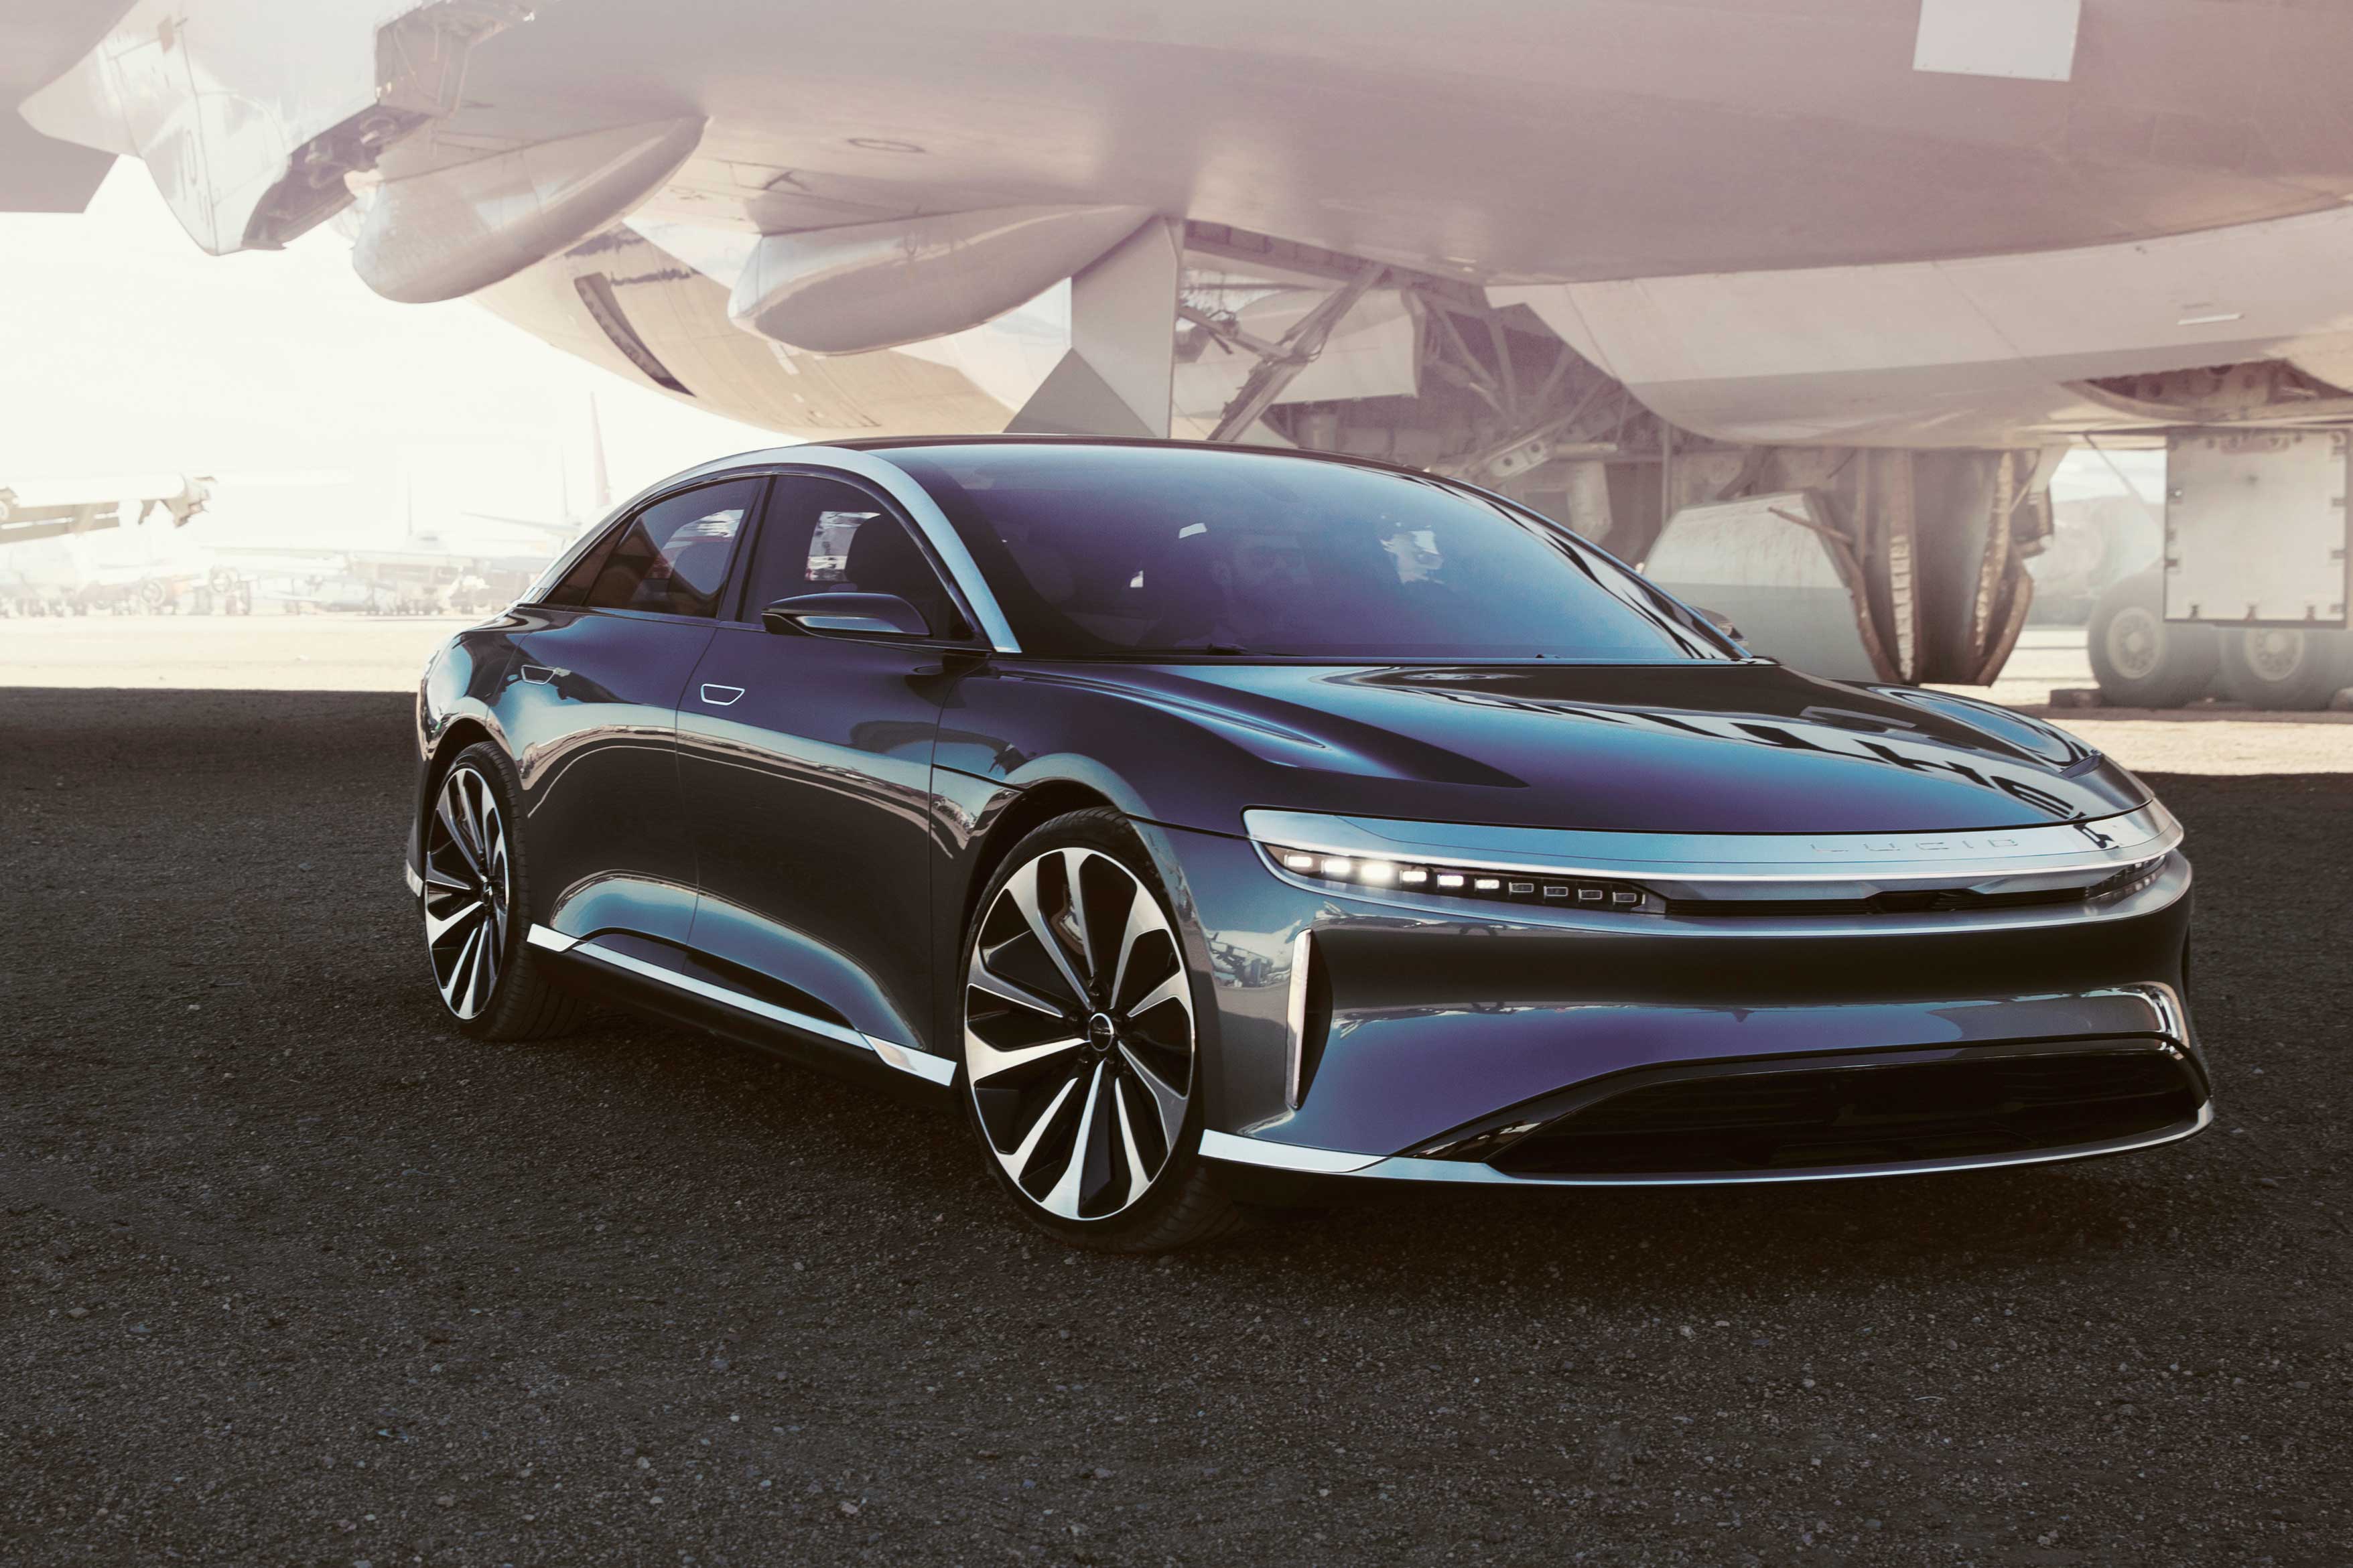 New Lucid Air is world’s longest-range electric car | DrivingElectric